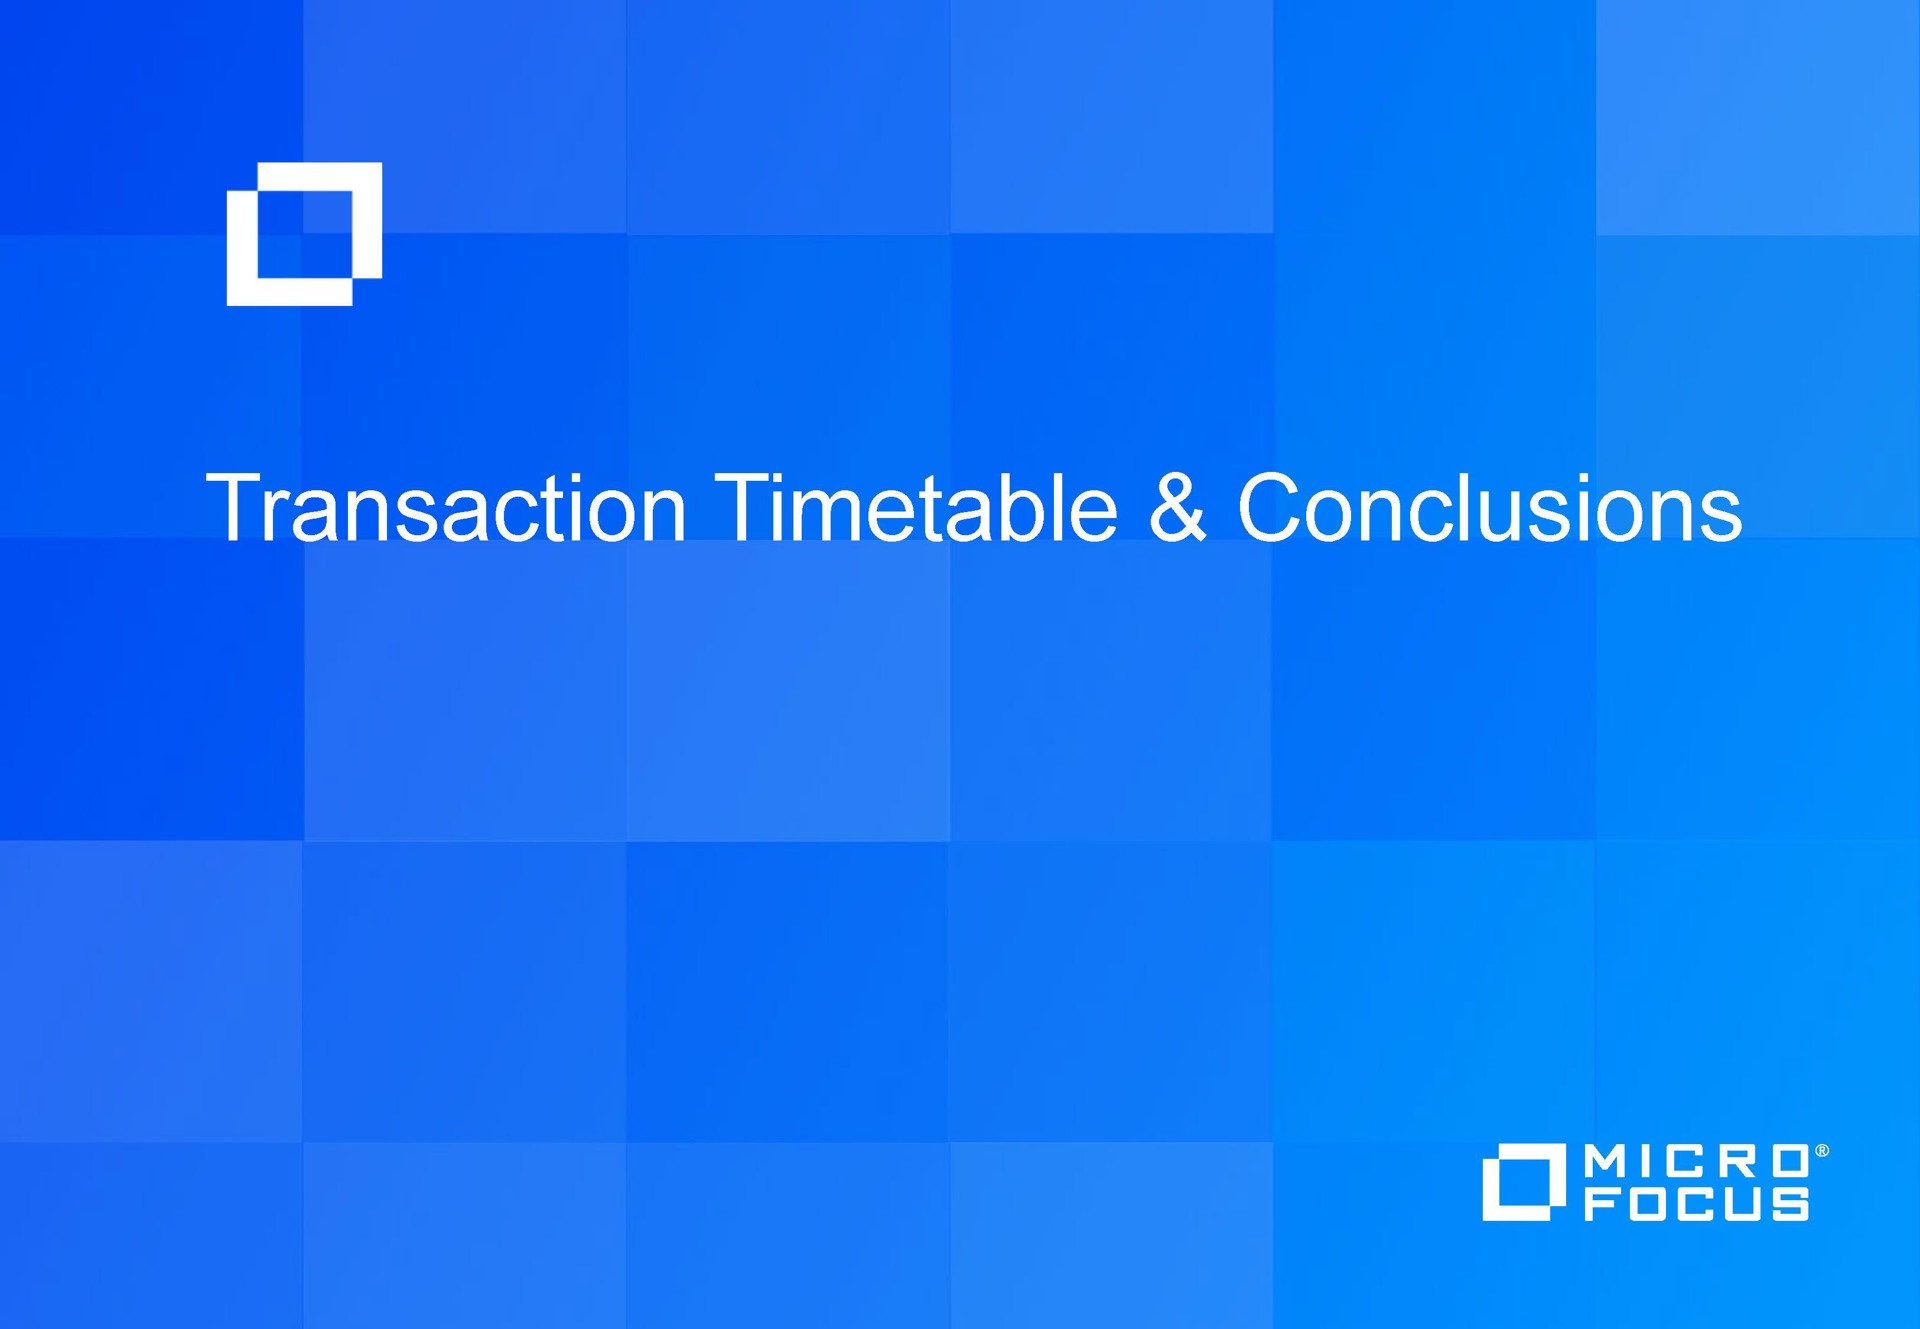 a transaction timetable conclusions | Micro Focus